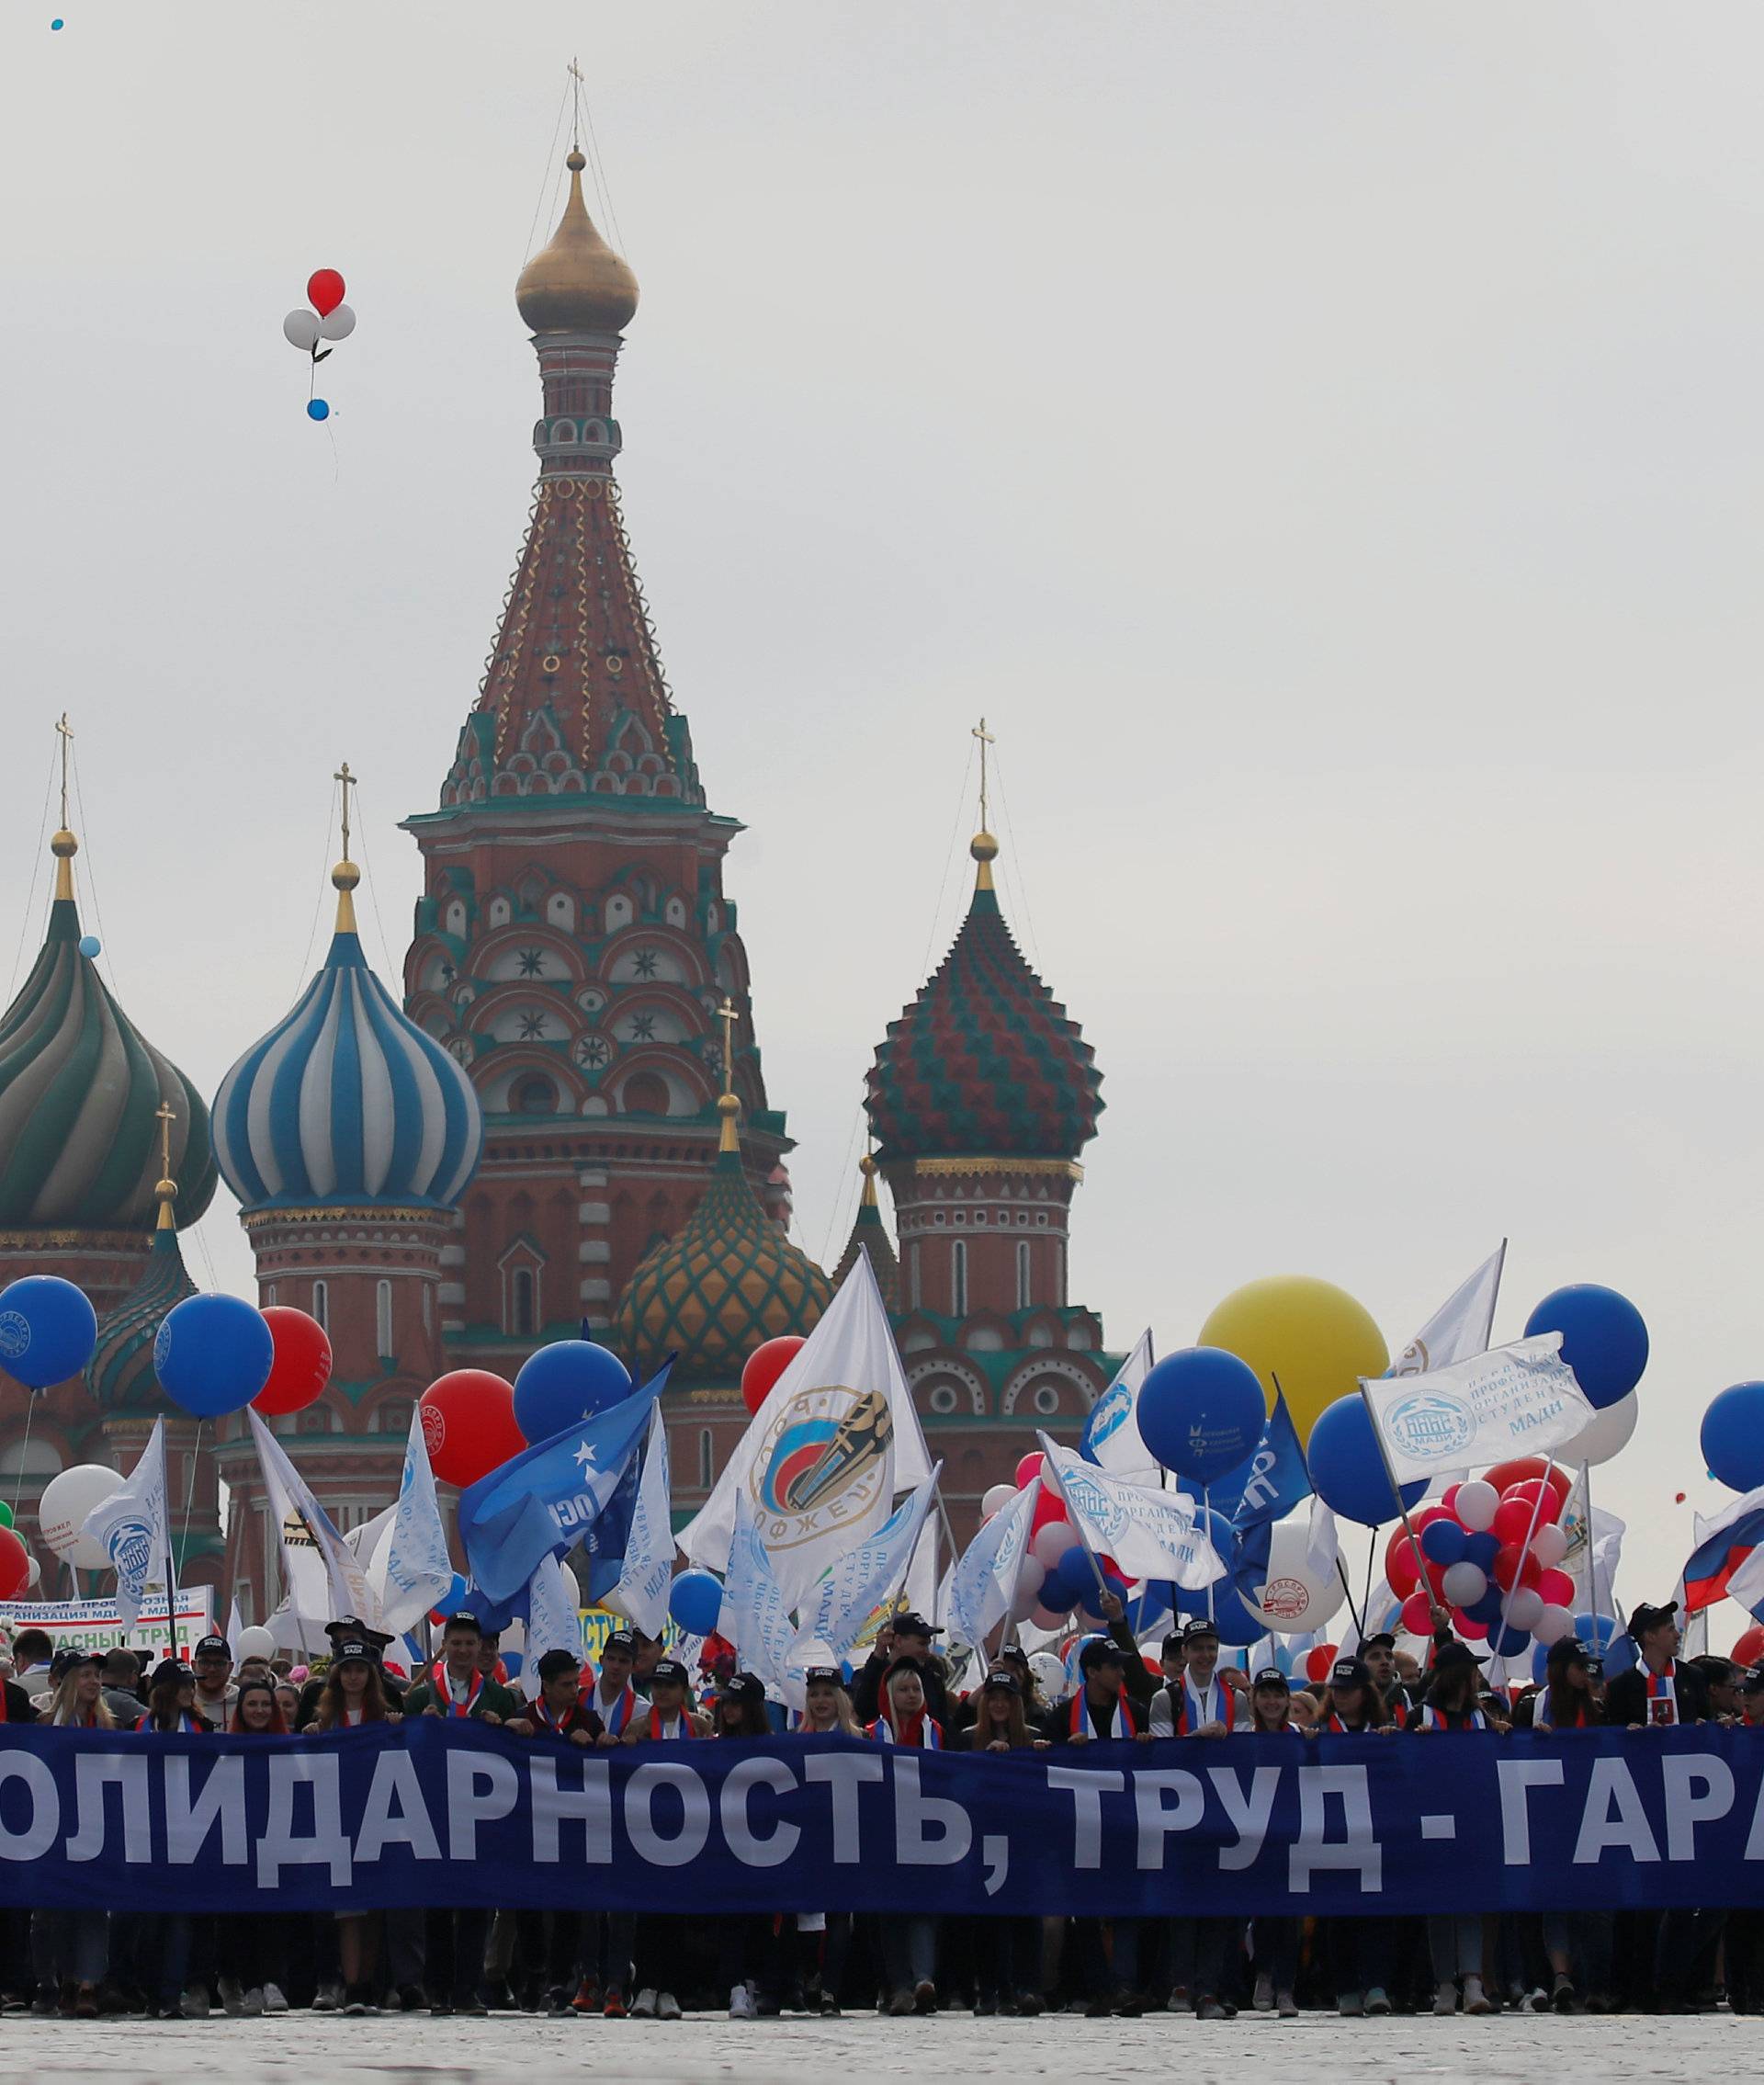 People carry a banner in front of St. Basil's Cathedral during a May Day rally at Red Square in Moscow